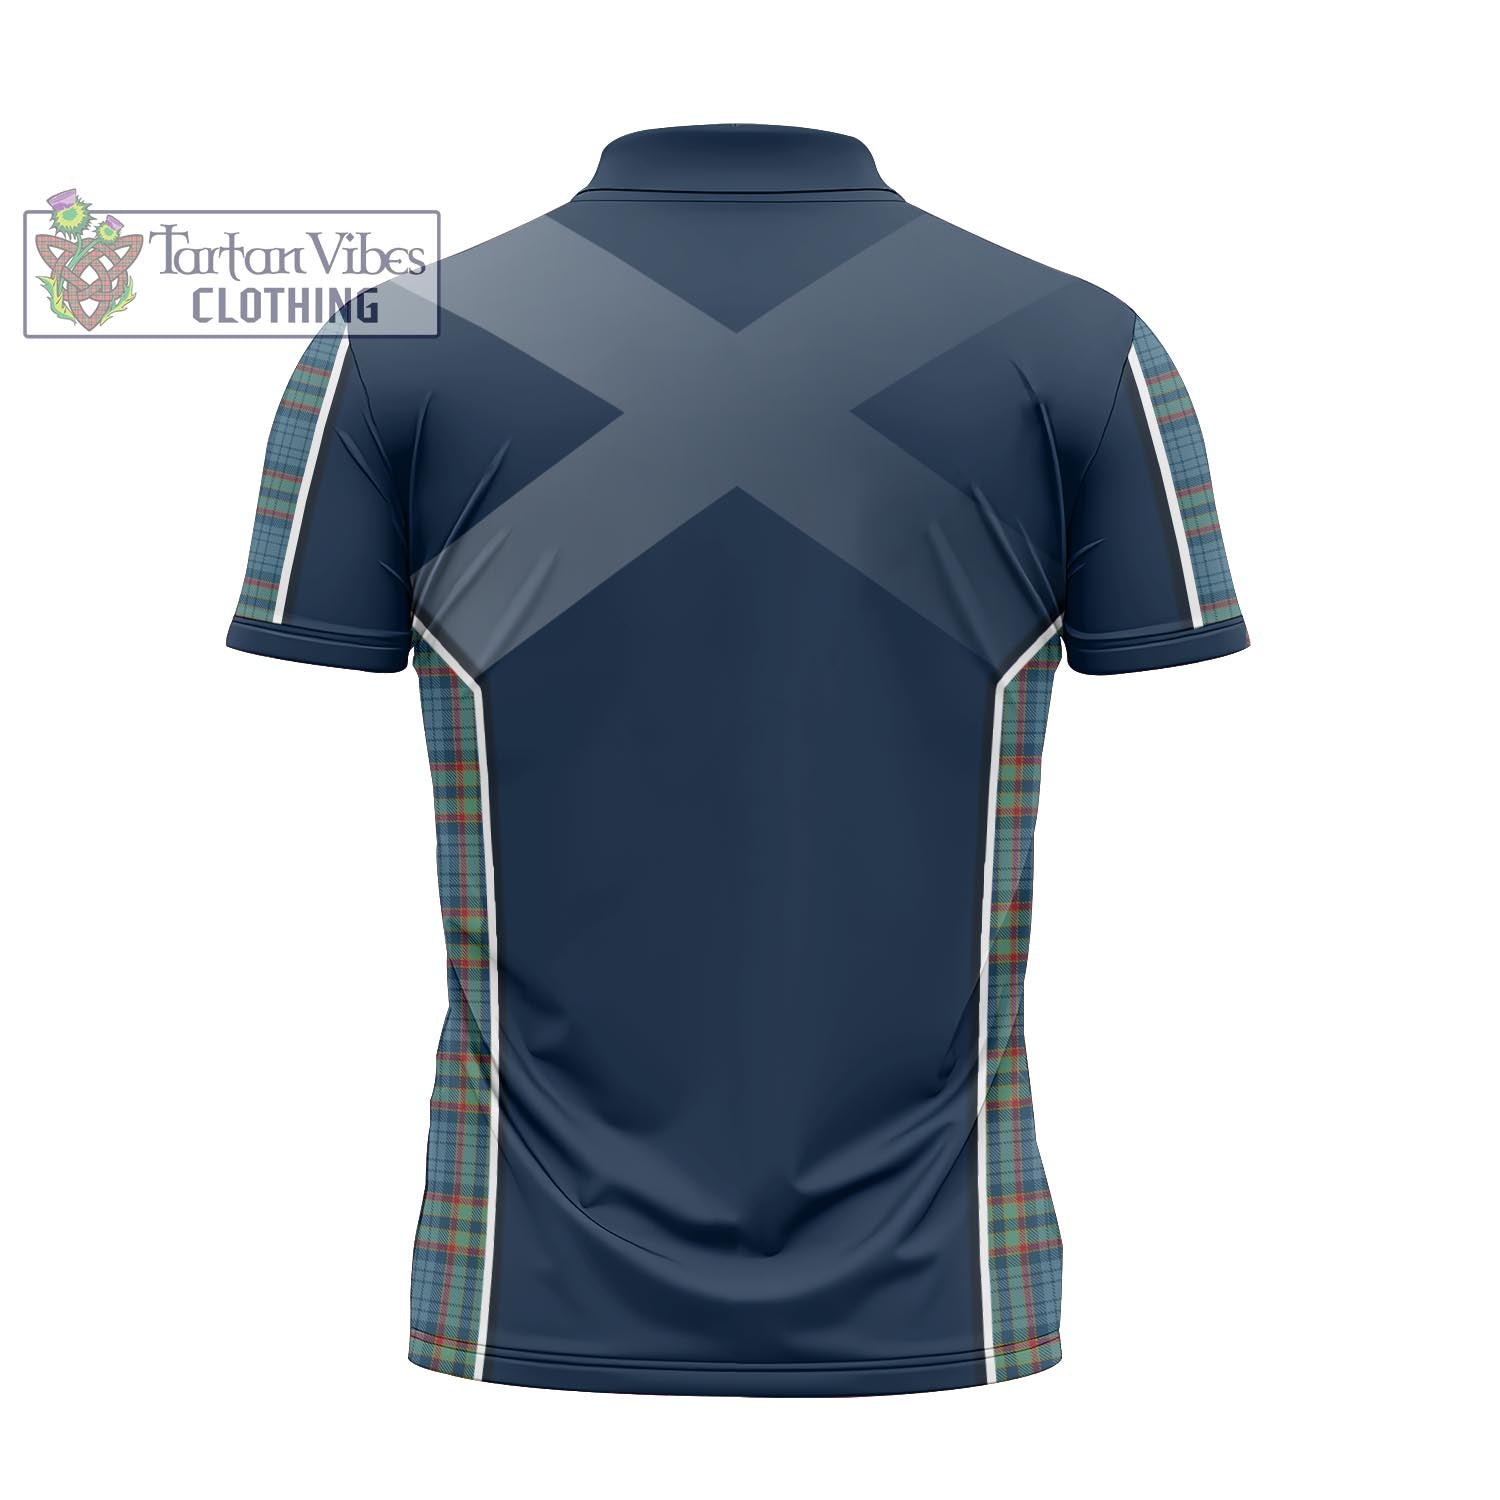 Tartan Vibes Clothing Ralston UK Tartan Zipper Polo Shirt with Family Crest and Lion Rampant Vibes Sport Style